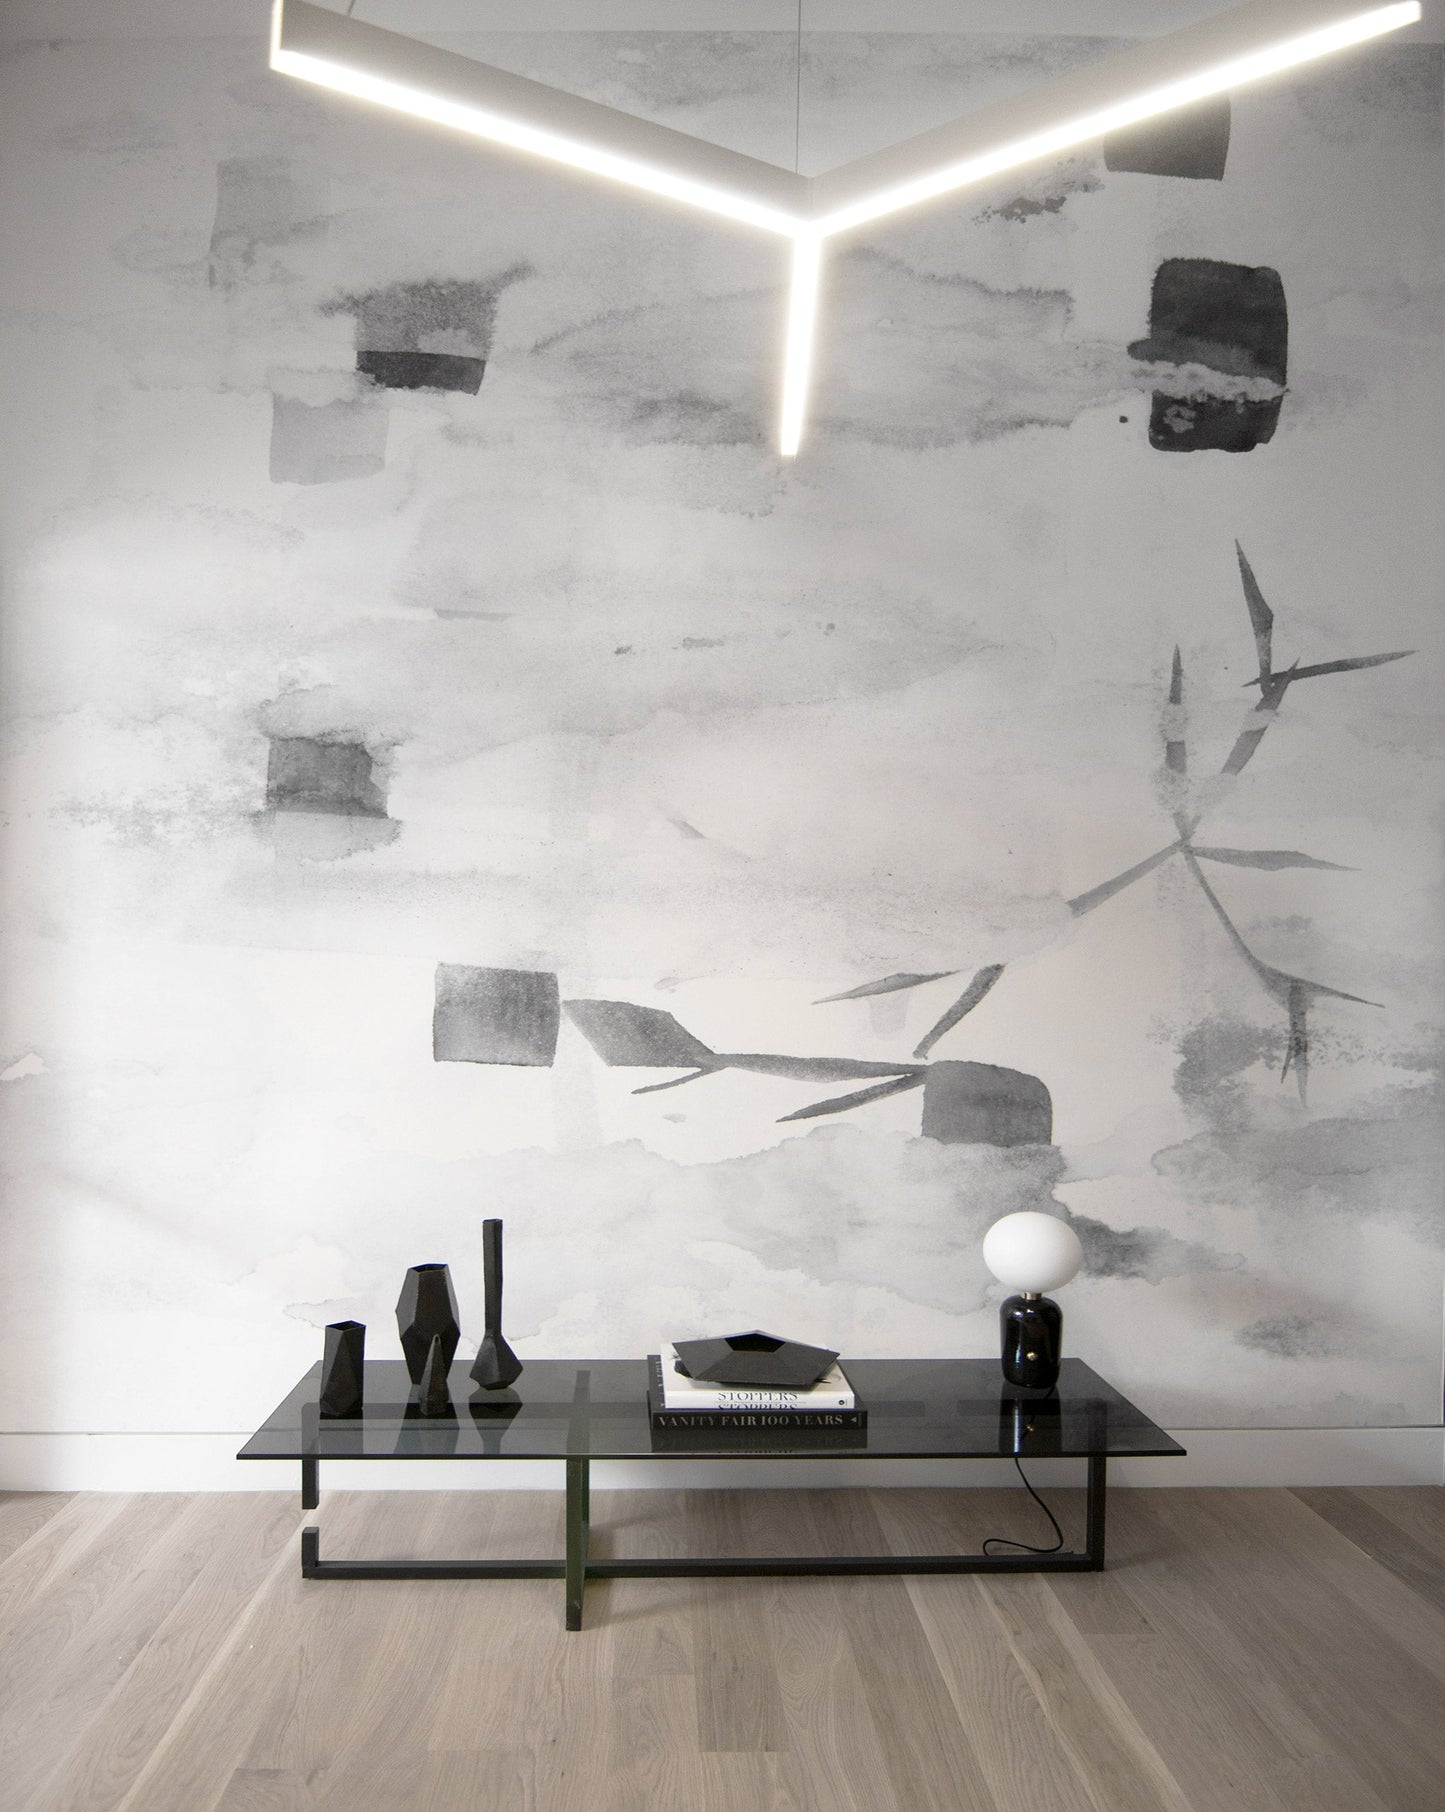 Eskayel's Sedge Wallpaper Mural with an abstract design and neutral palette is showcased in an open space..